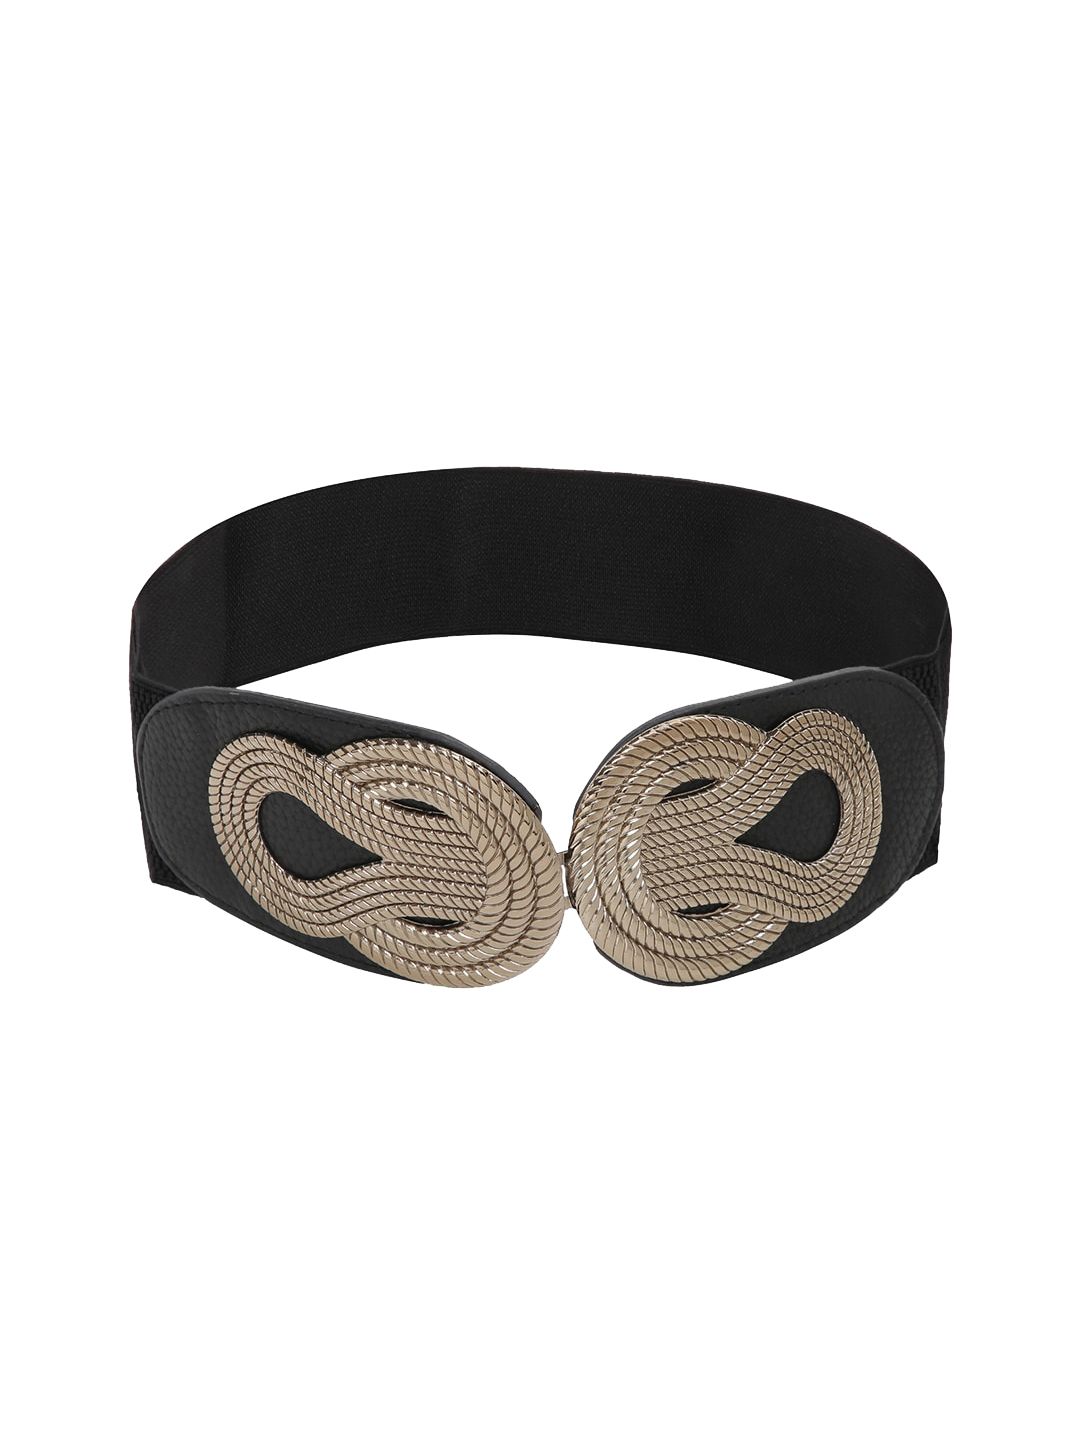 CRUSSET Women Black & Gold-Toned Solid Wide Belt Price in India